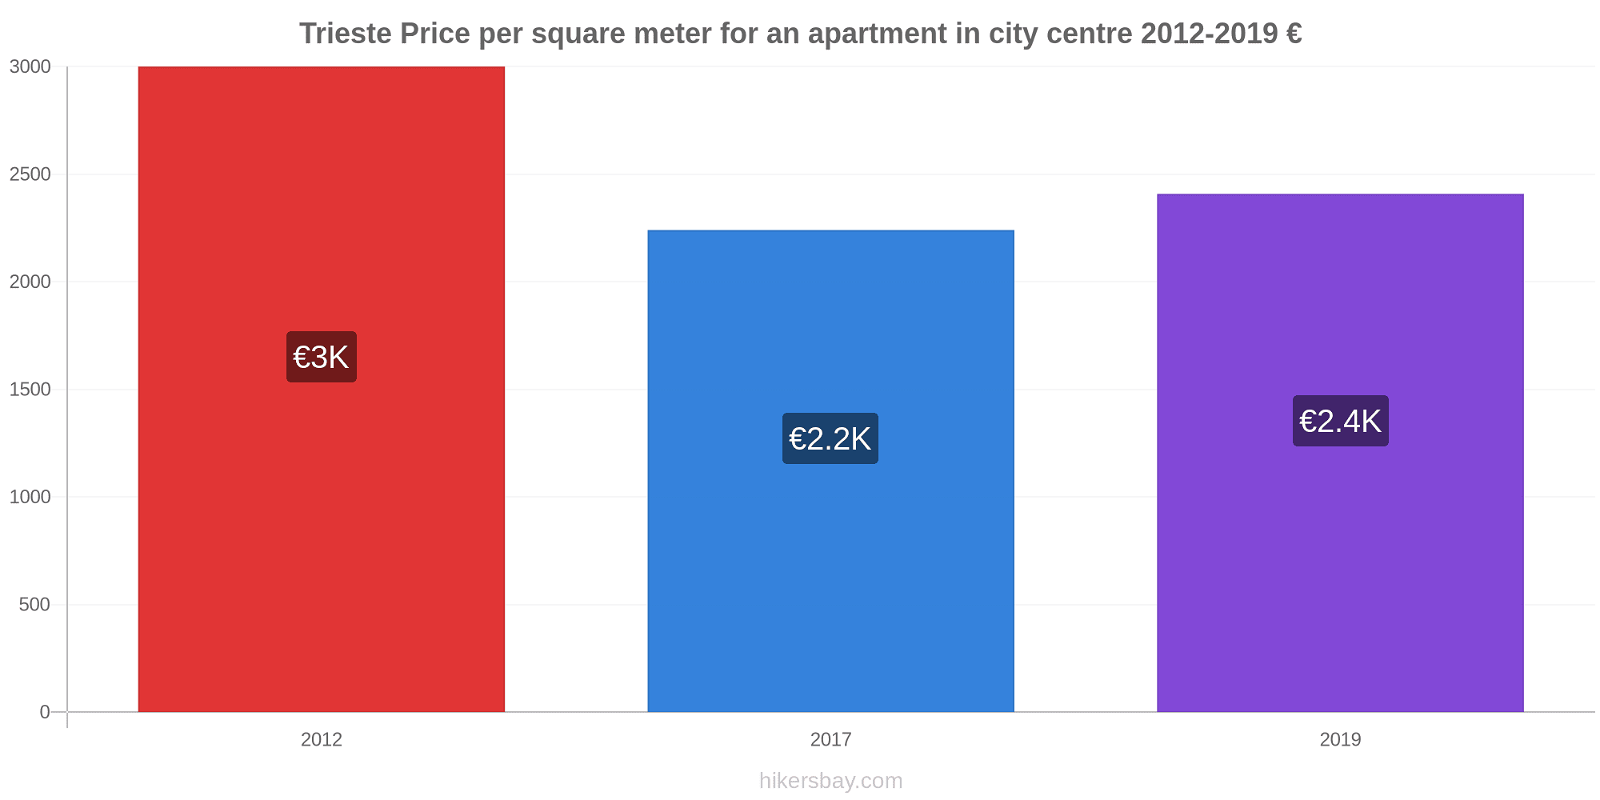 Trieste price changes Price per square meter for an apartment in city centre hikersbay.com